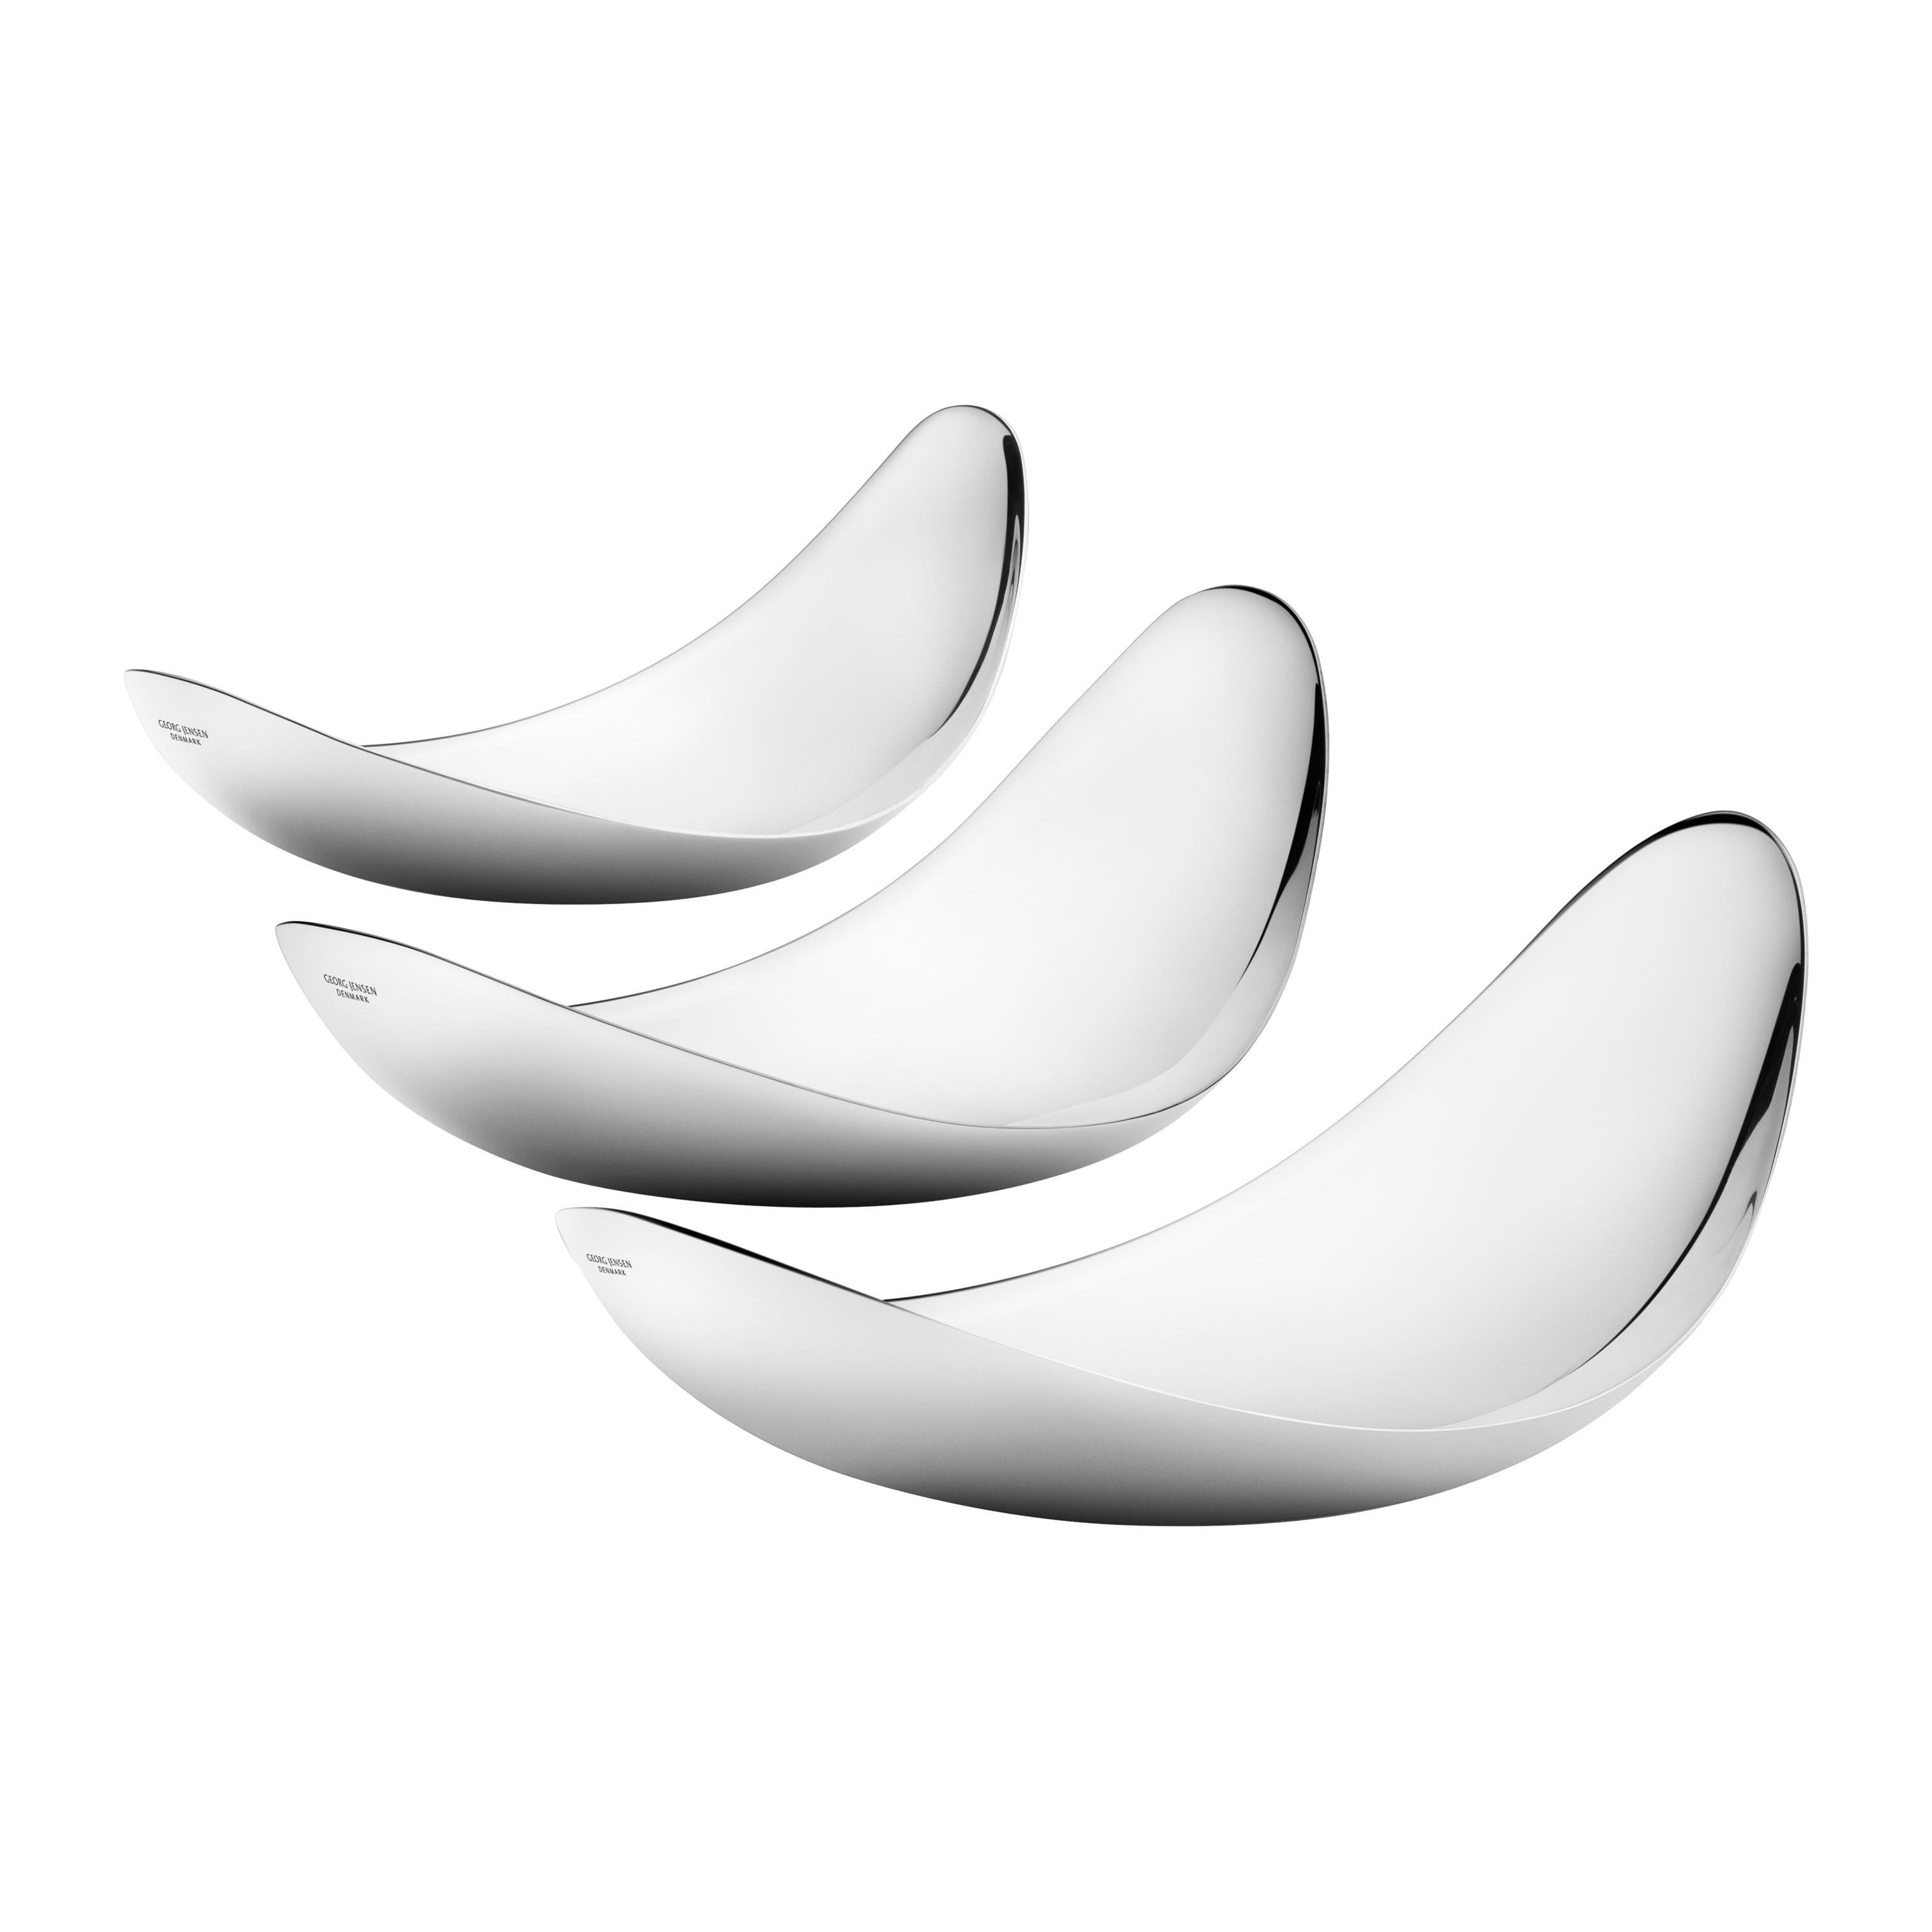 Georg Jensen Leaf Dish Set in Stainless Steel Mirror Finish by Helle Damkjaer For Sale